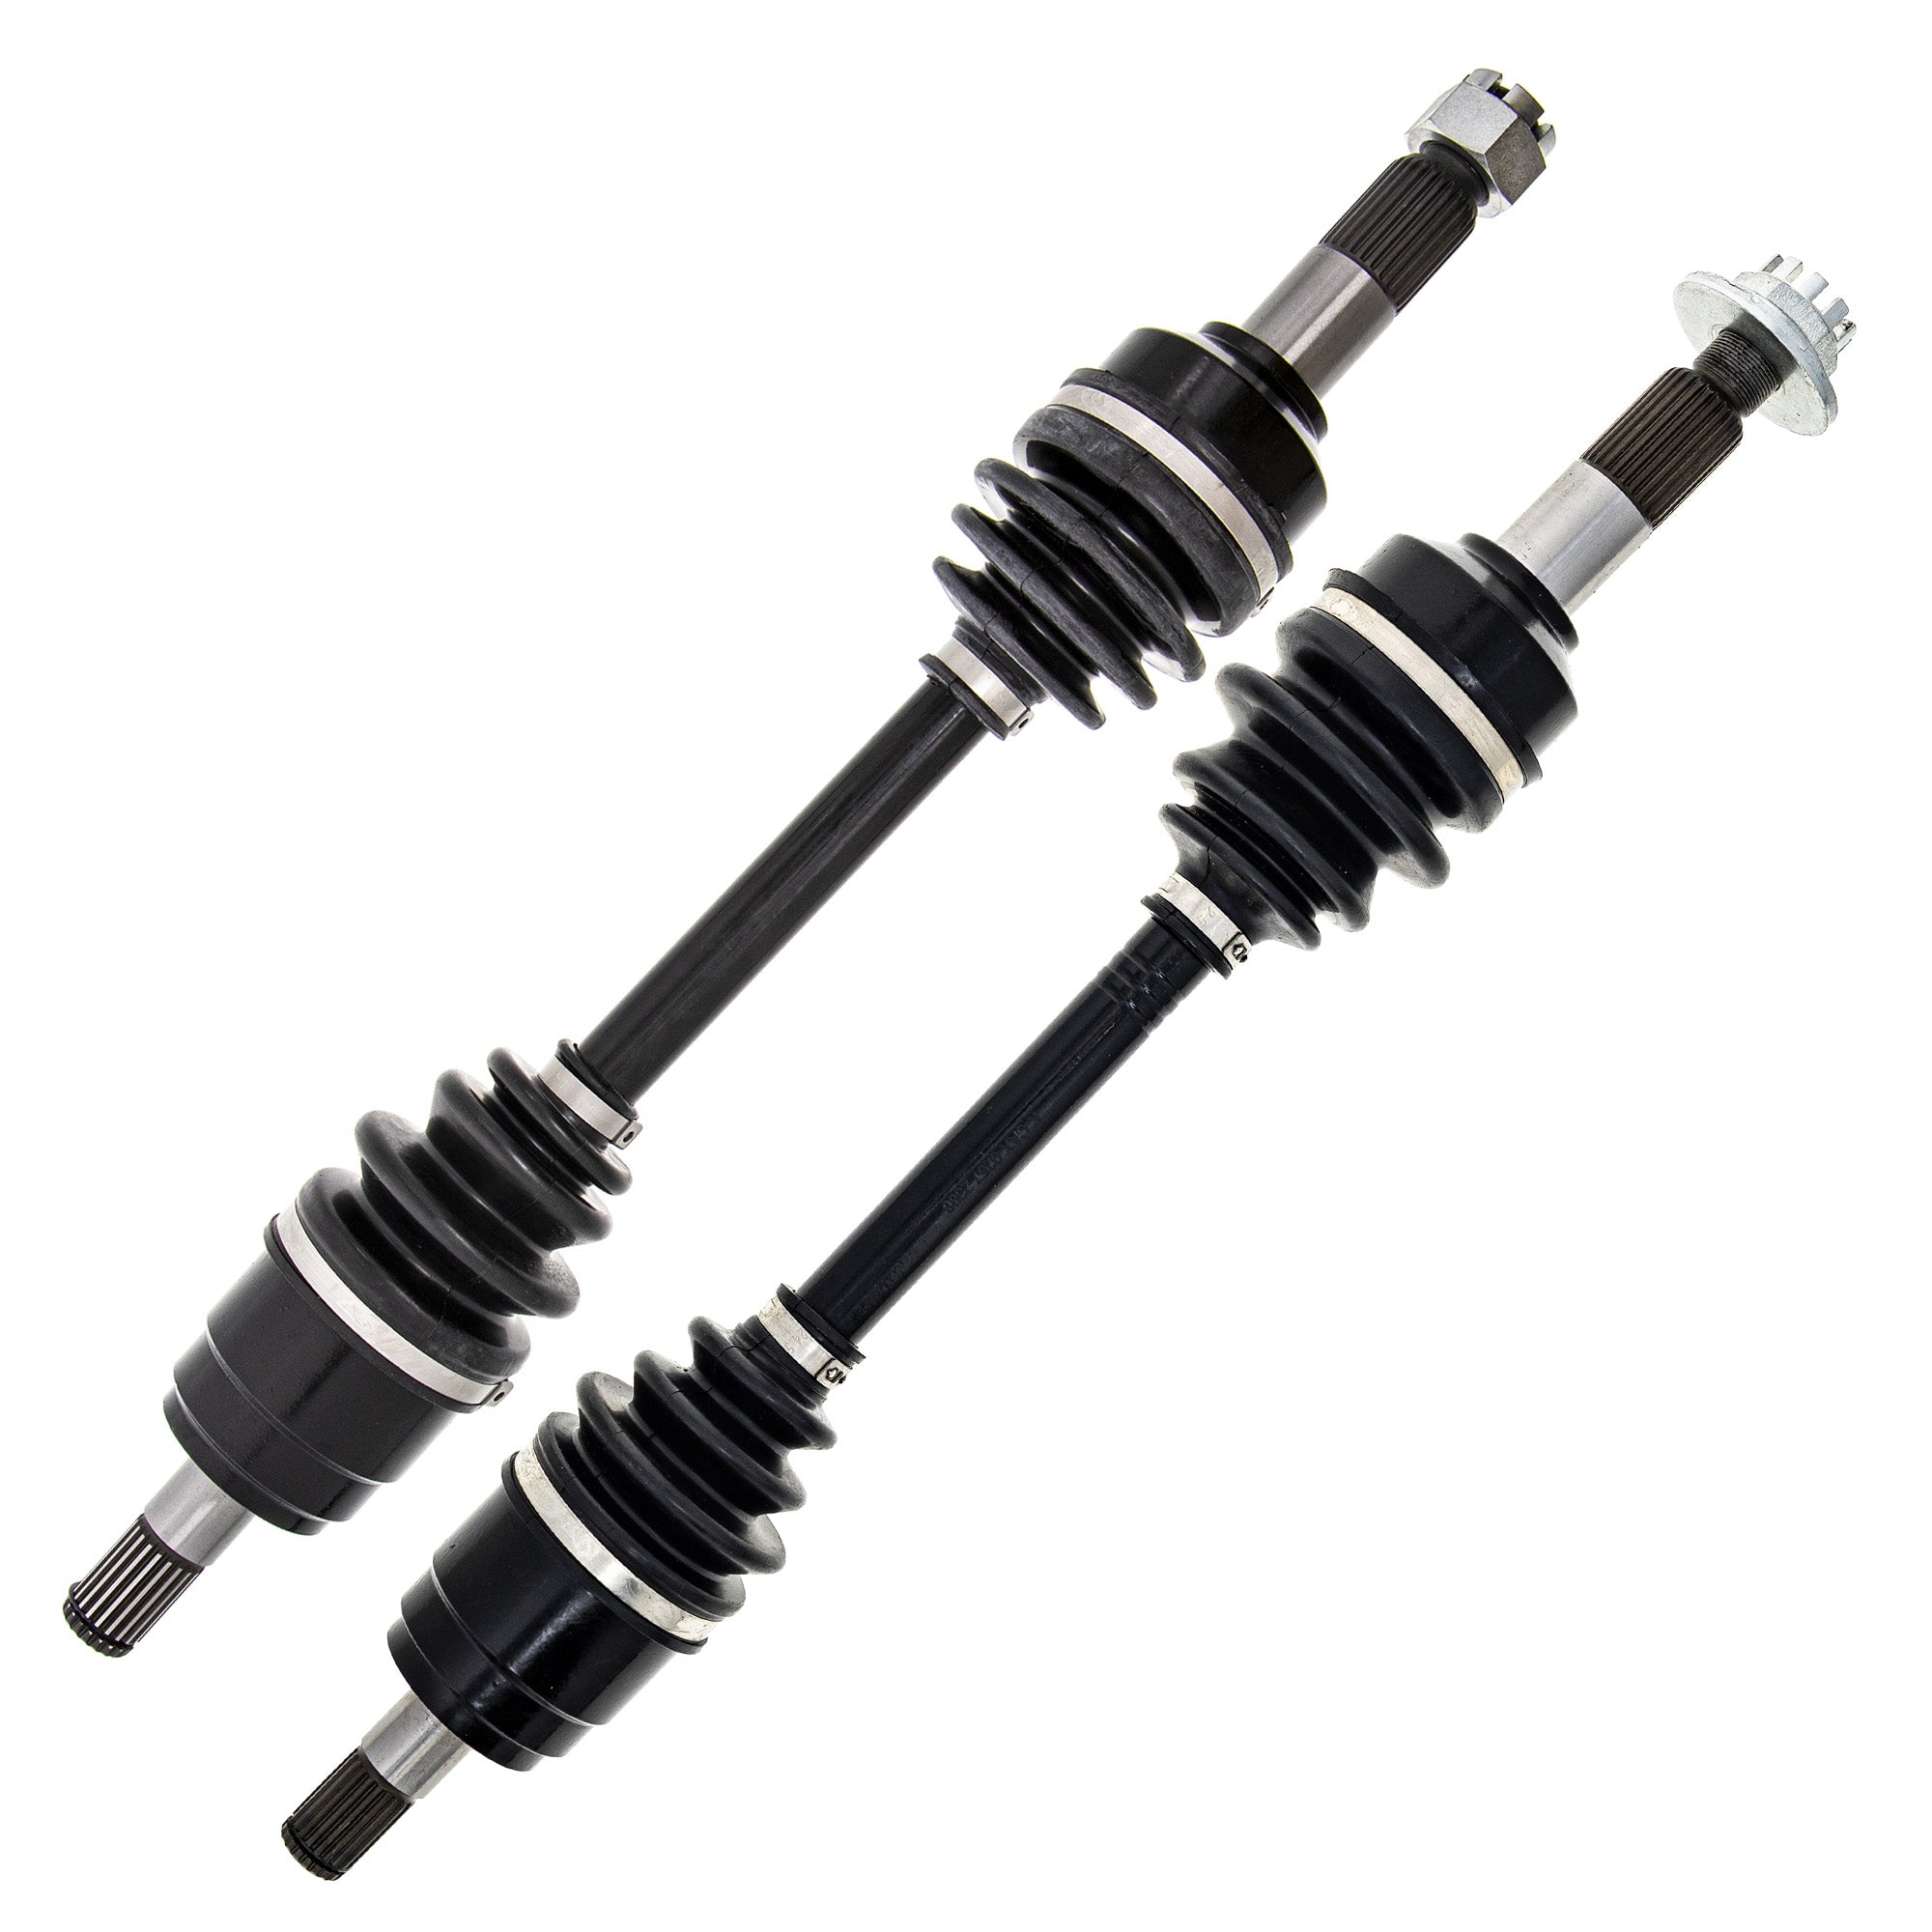 High Strength Drive Shaft CV Axle Assembly Kit for NICHE MK1012053